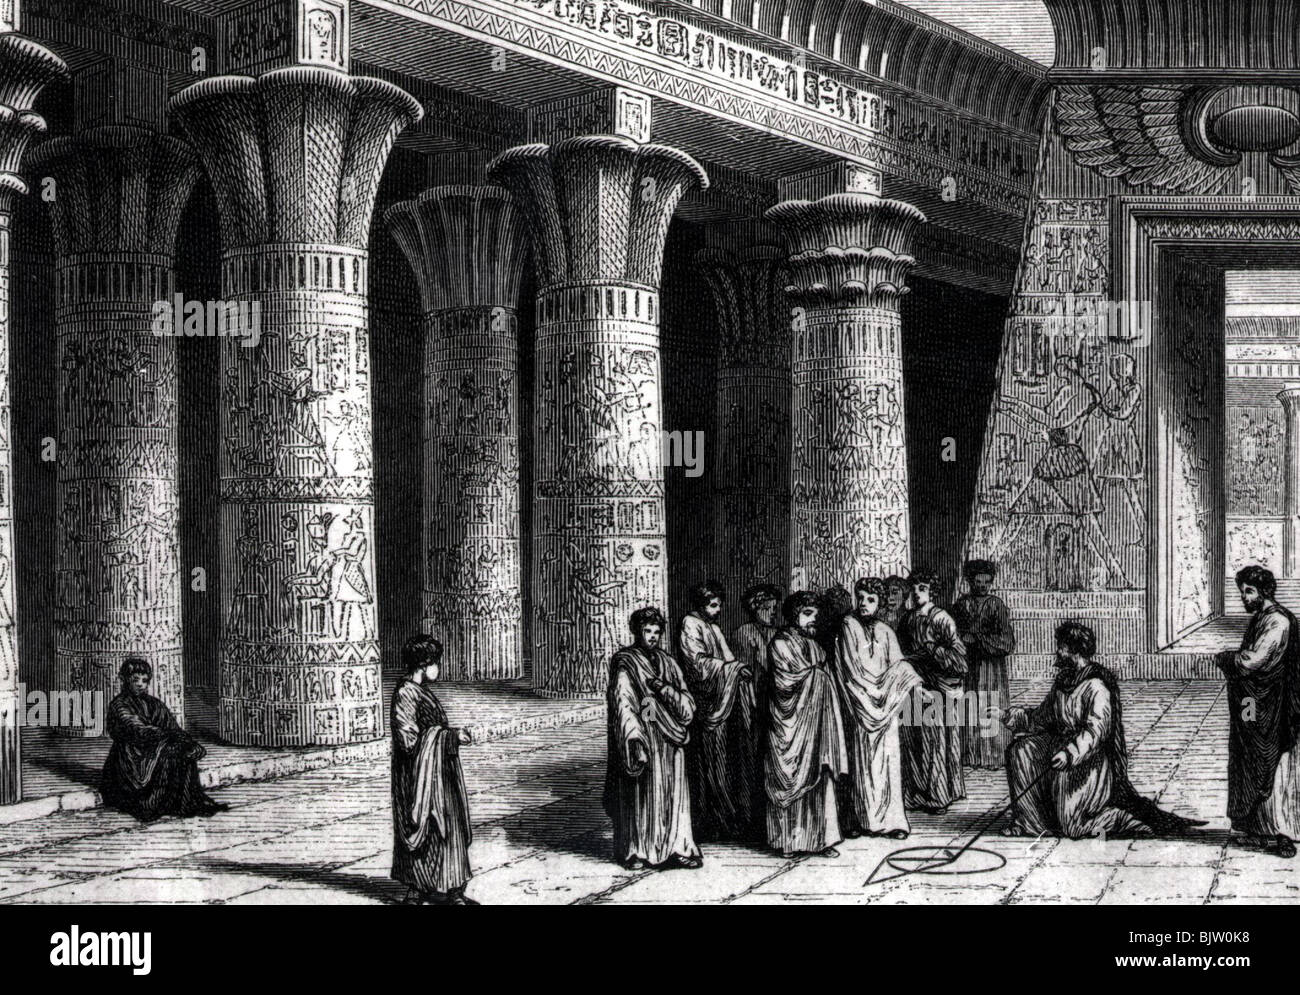 geography / travel, Egypt, Alexandria, Museion, mathematical recitation, wood engraving after drawing by Alexandre Bar, 19th century, historic, historical, recitations, lecture, science, ancient world, education, ancient world, people, Stock Photo